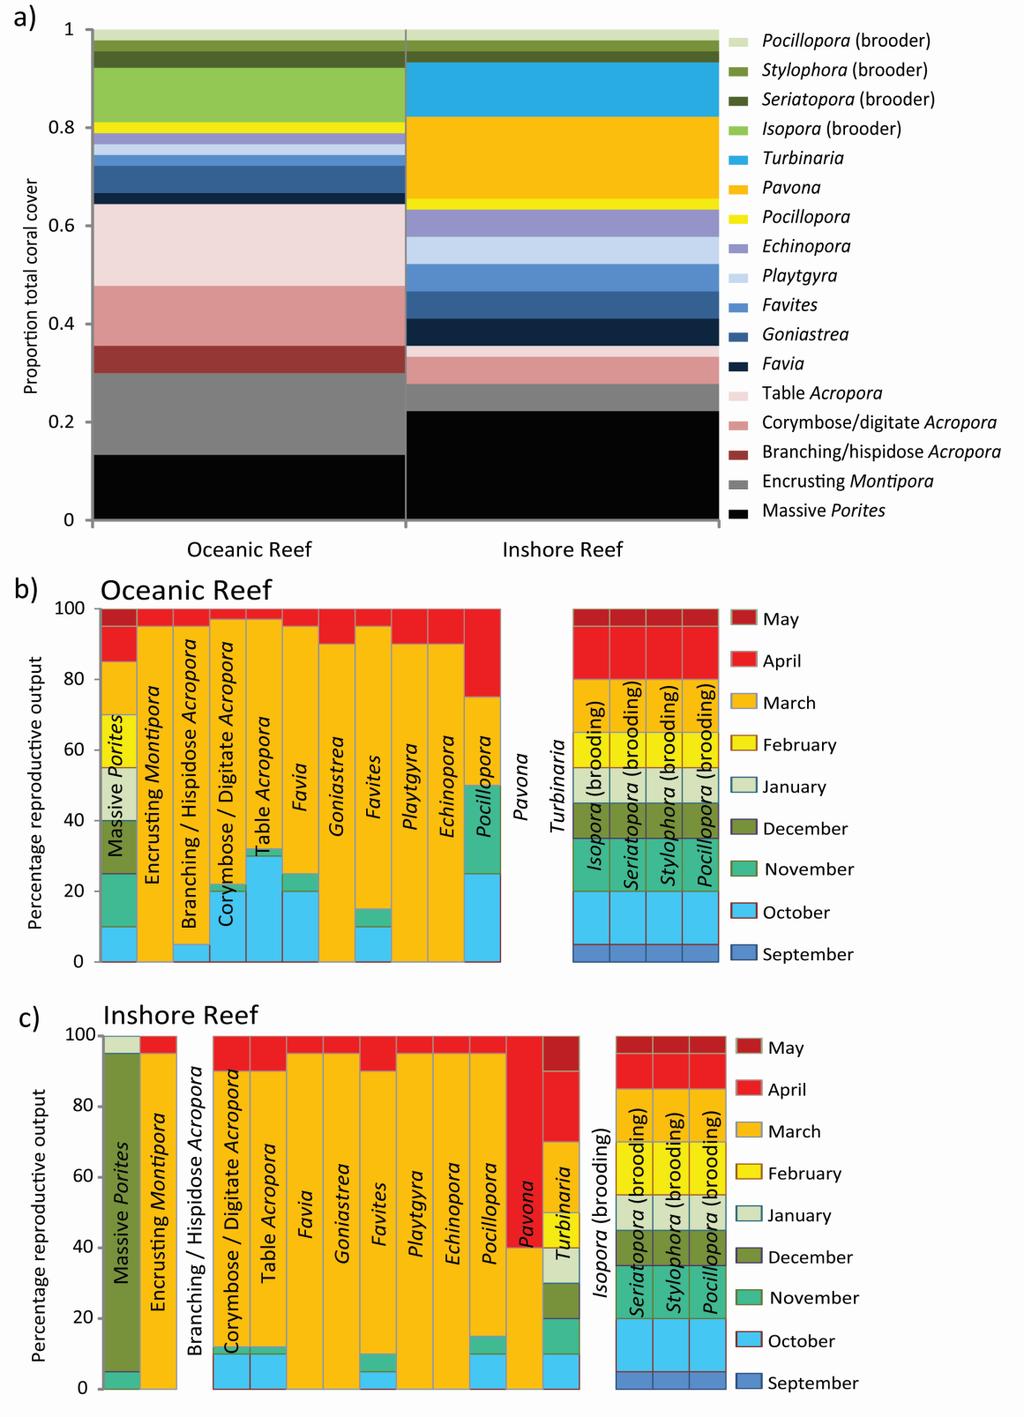 Figure 2. Variation in composition and times of reproduction at Western Australian Reefs.